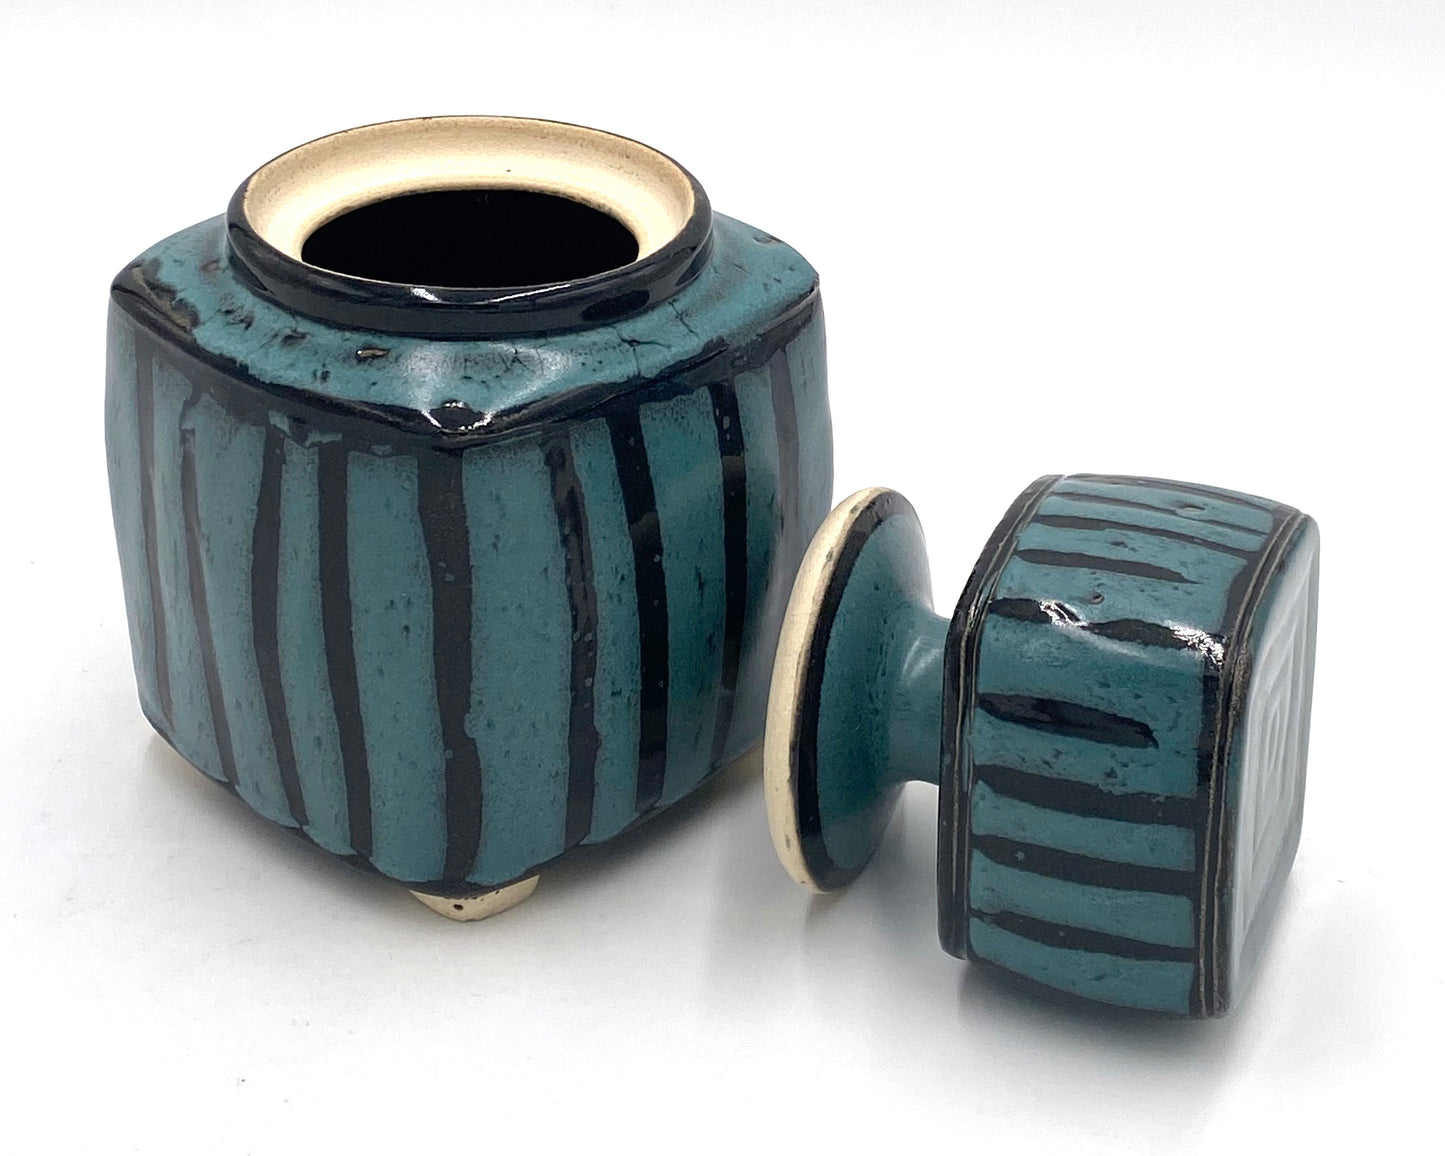 Turquoise and Black Square Covered Jar